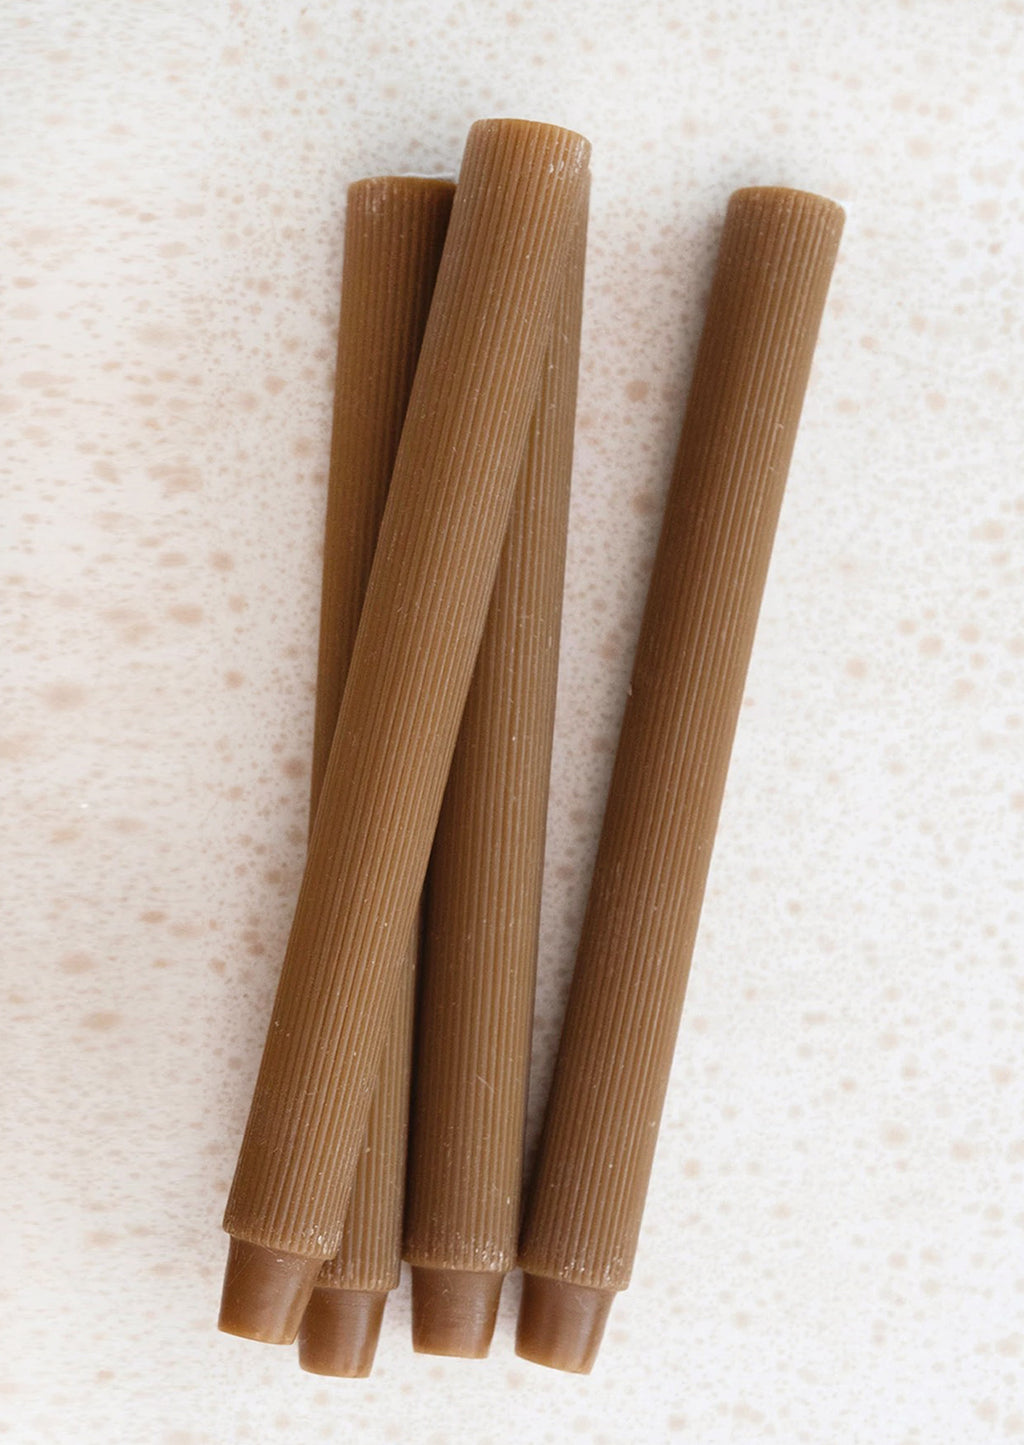 Cider: Taper candles with fine ribbed texture in cider brown.